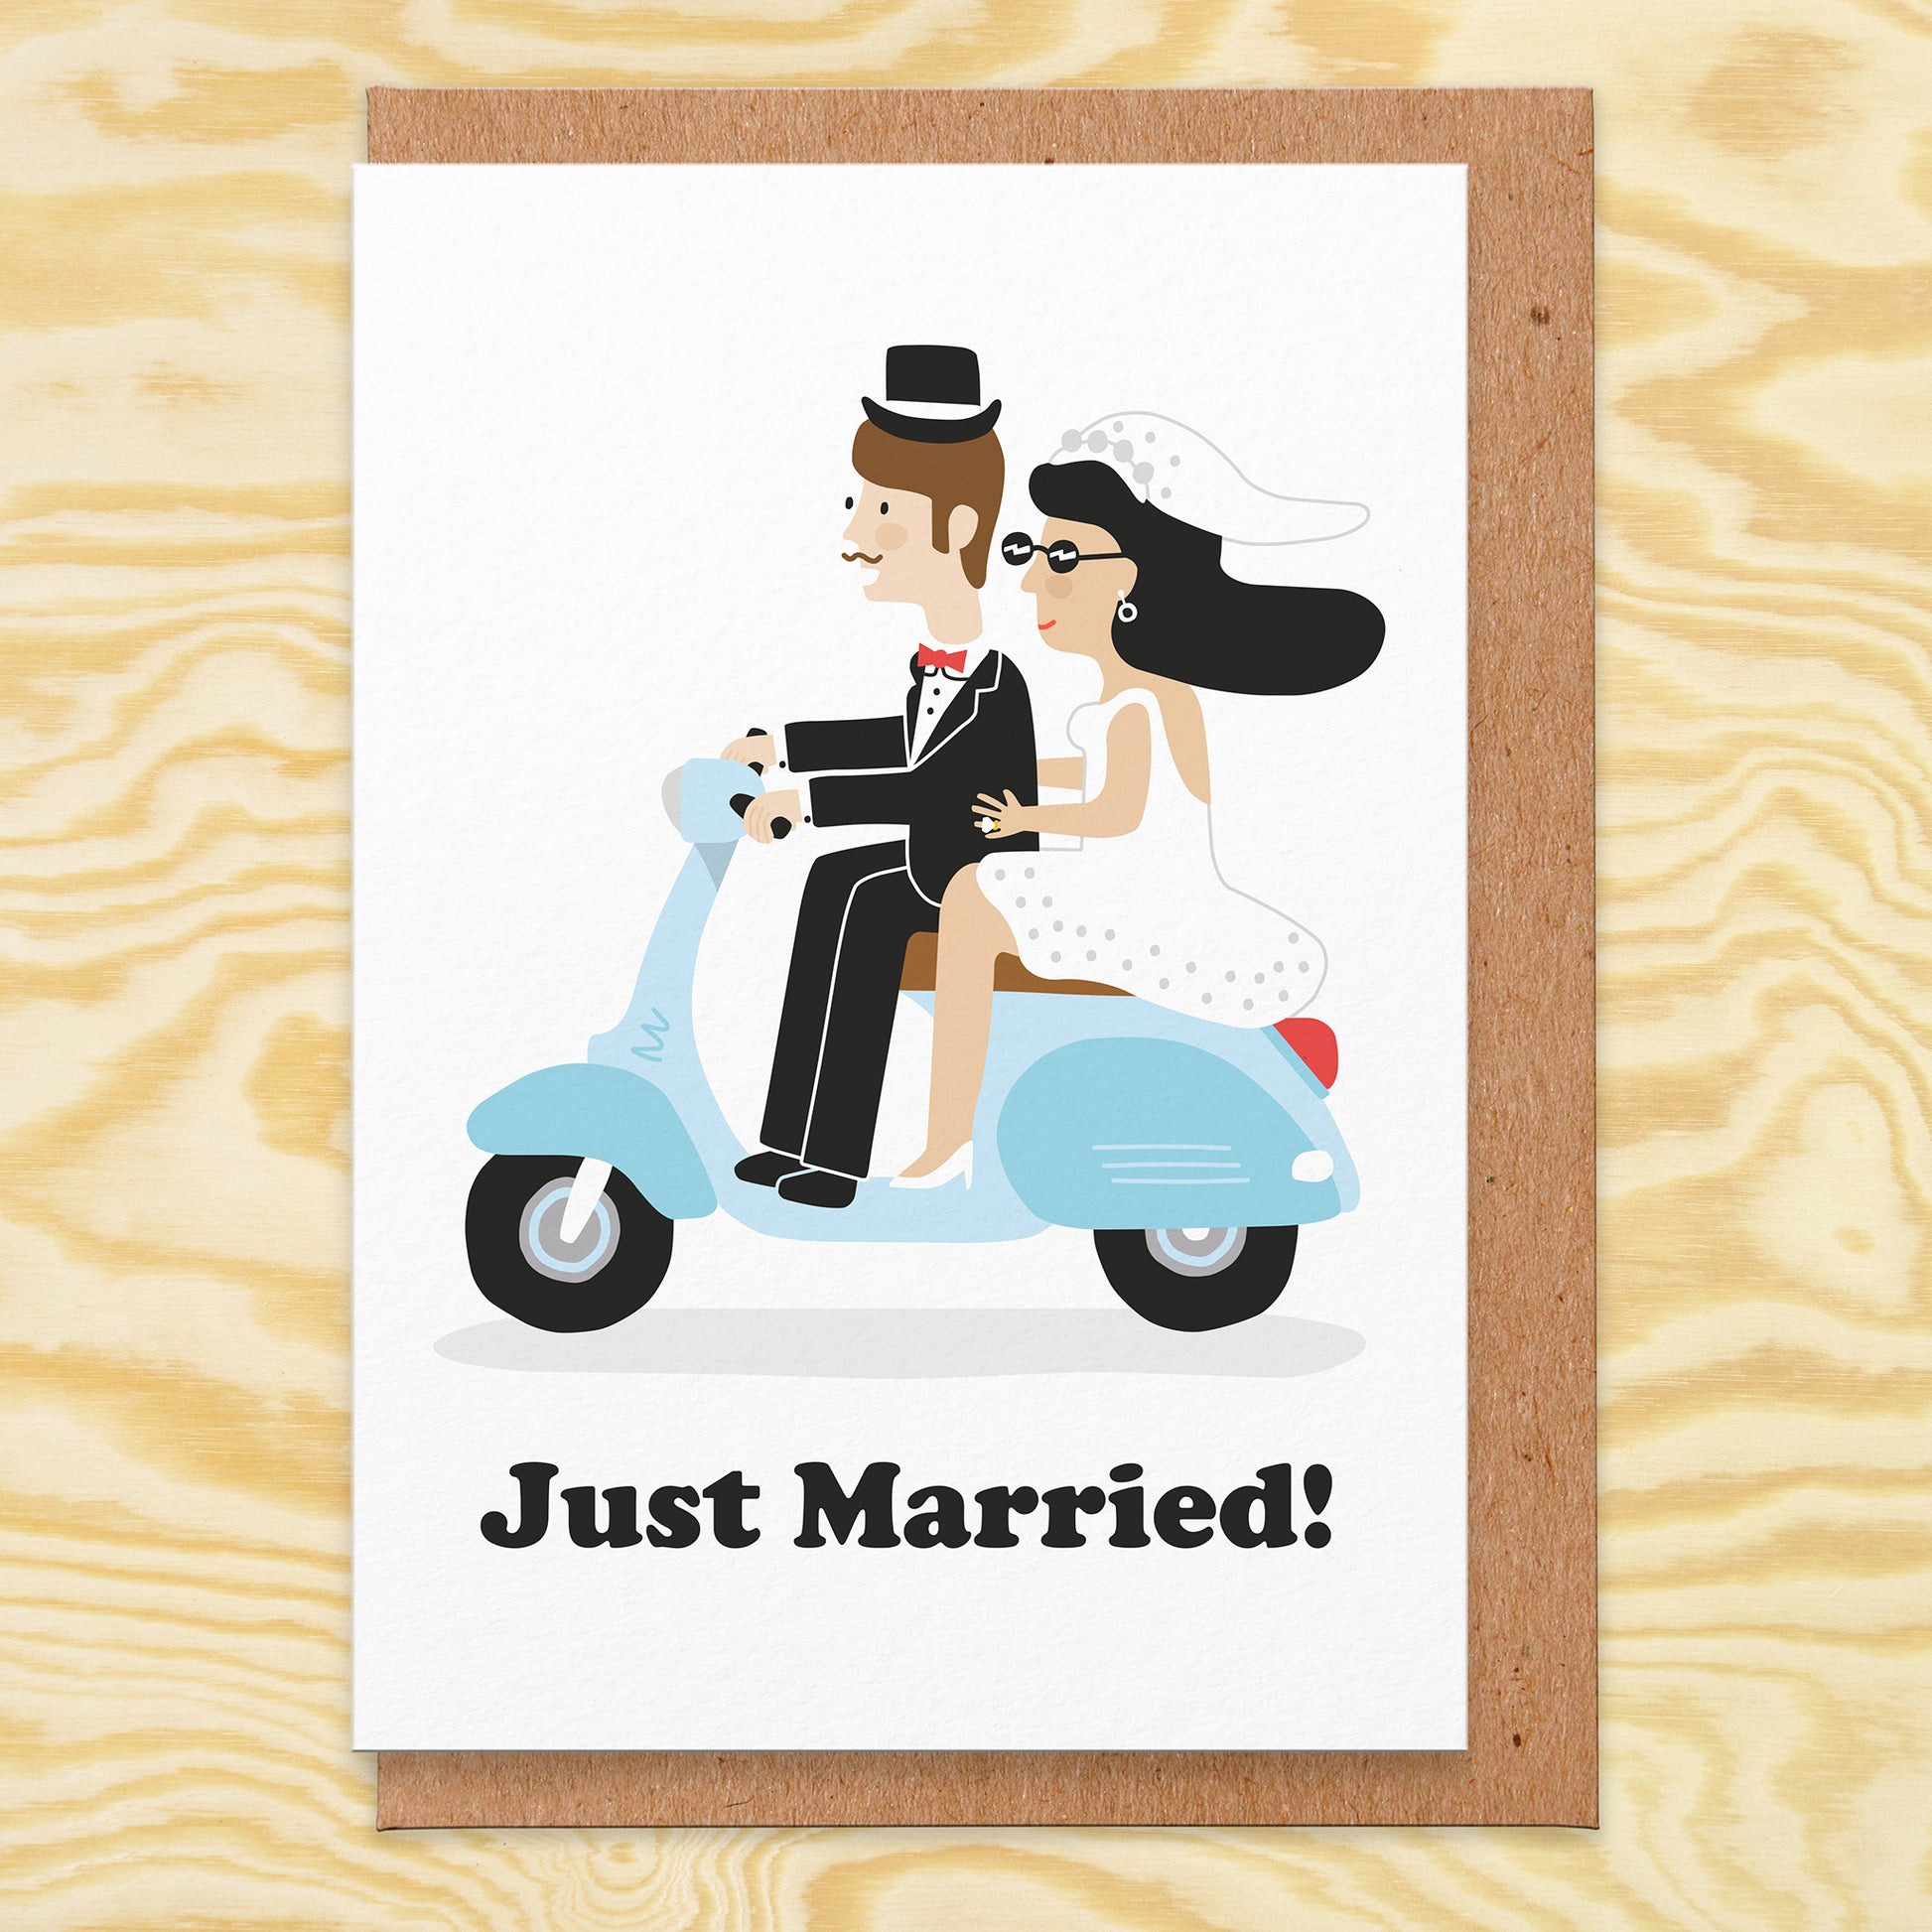 Wedding card that reads just married. There's an illustration of a retro scooter and a bride and groom riding it.